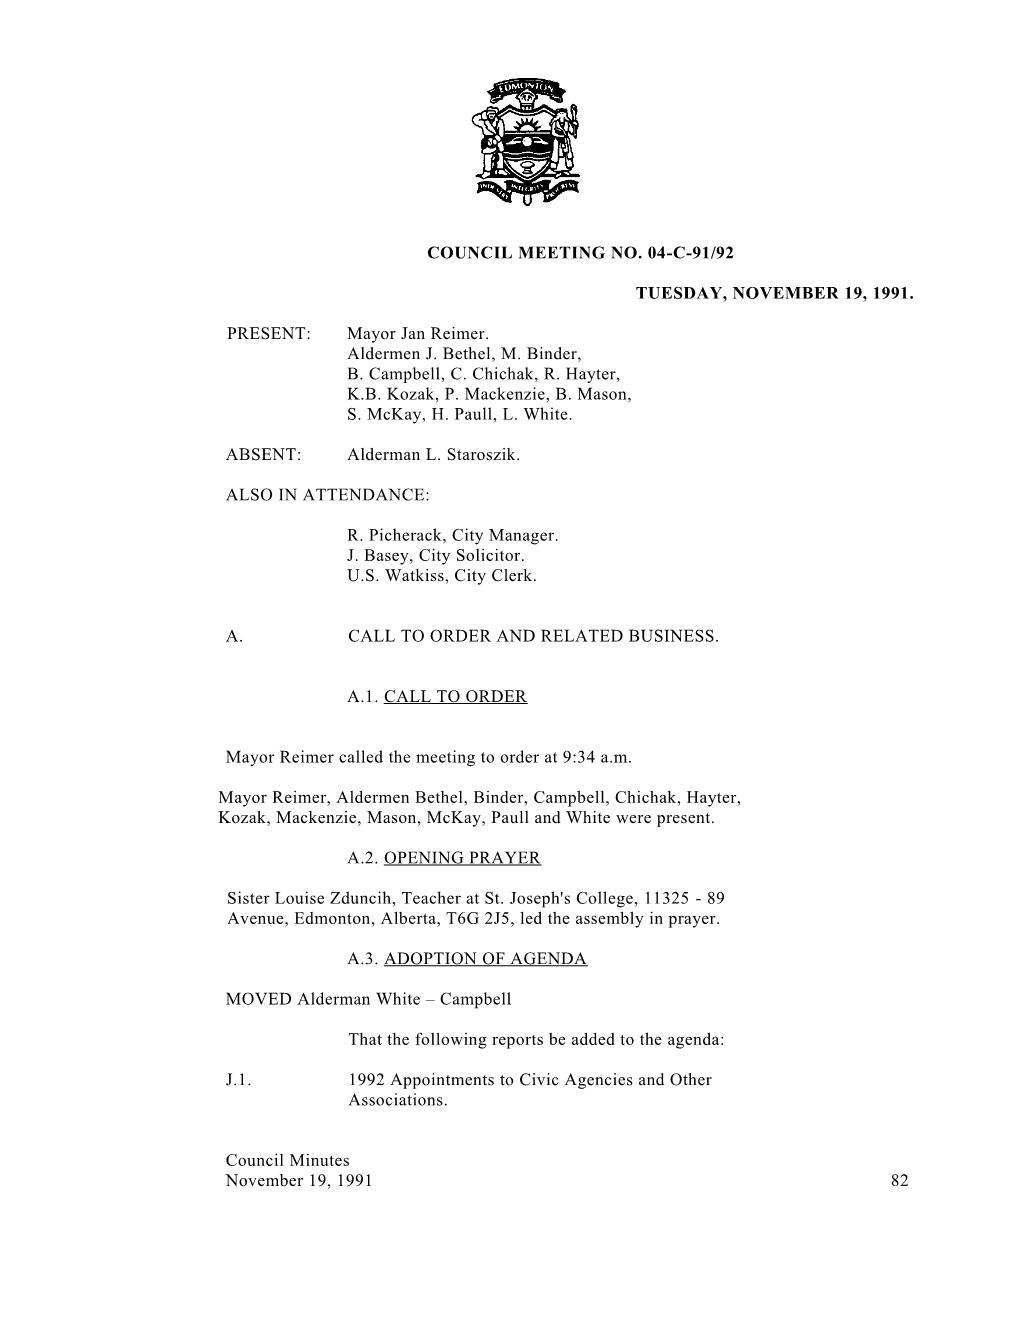 Minutes for City Council November 19, 1991 Meeting